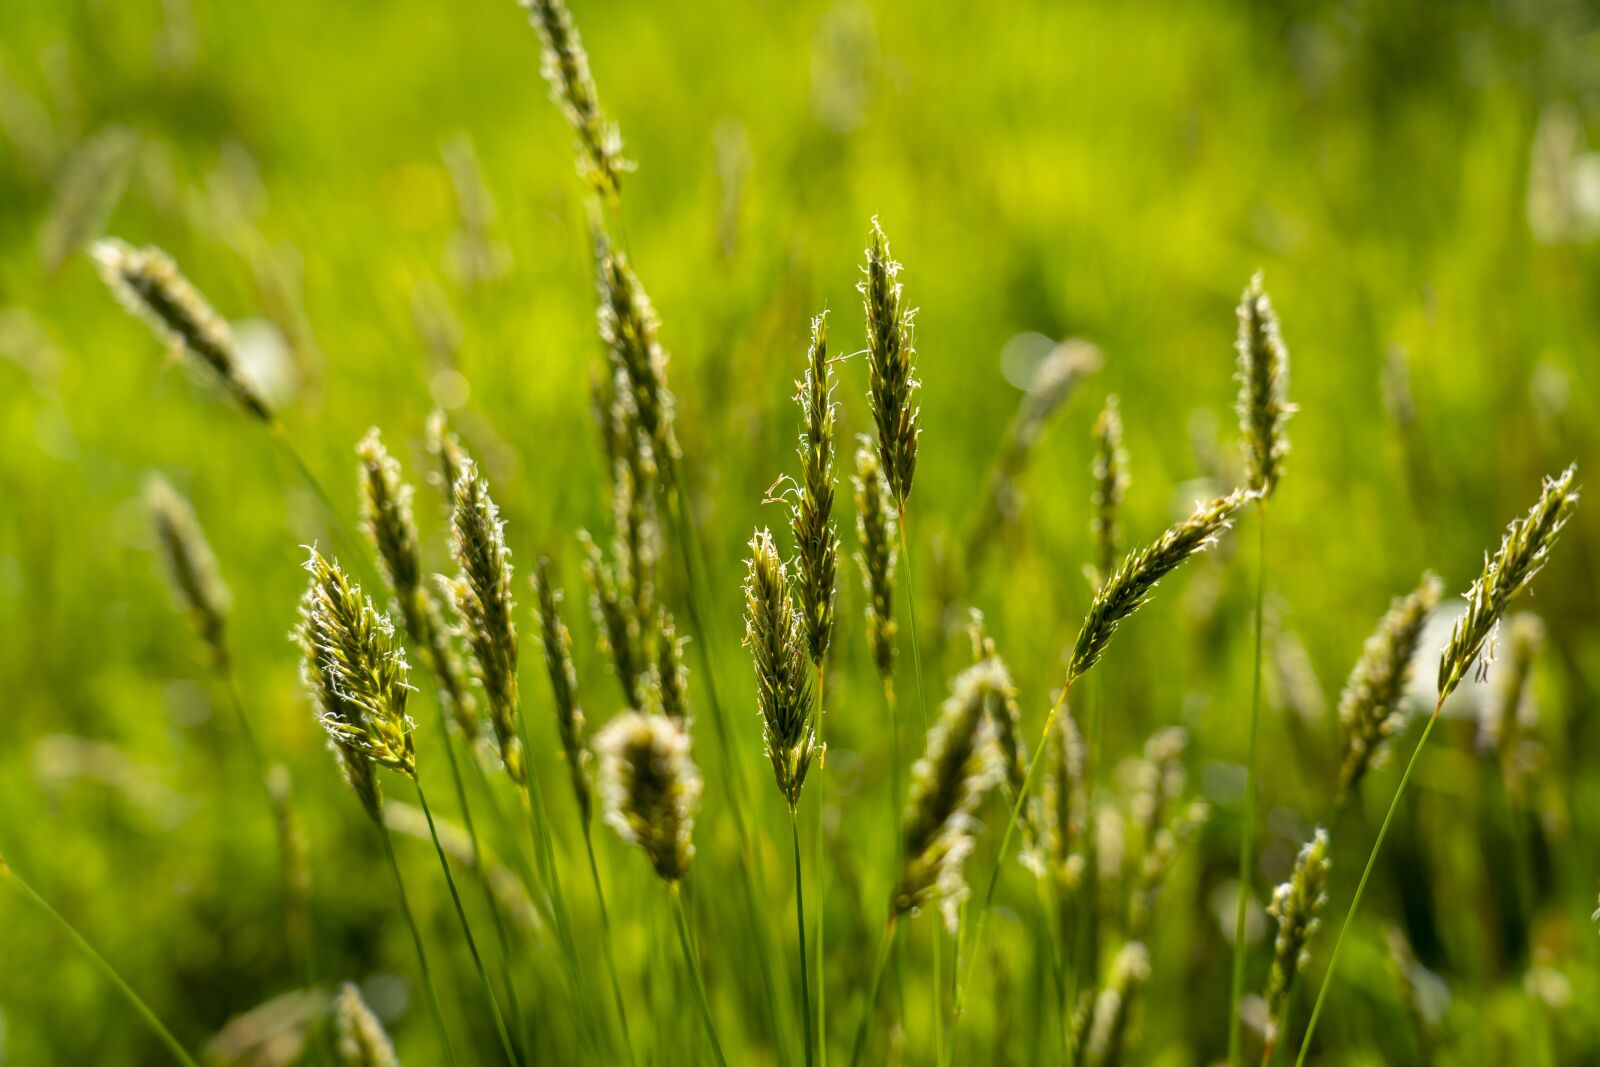 Sony a7 III sample photo. Grass, stalks, nature photography